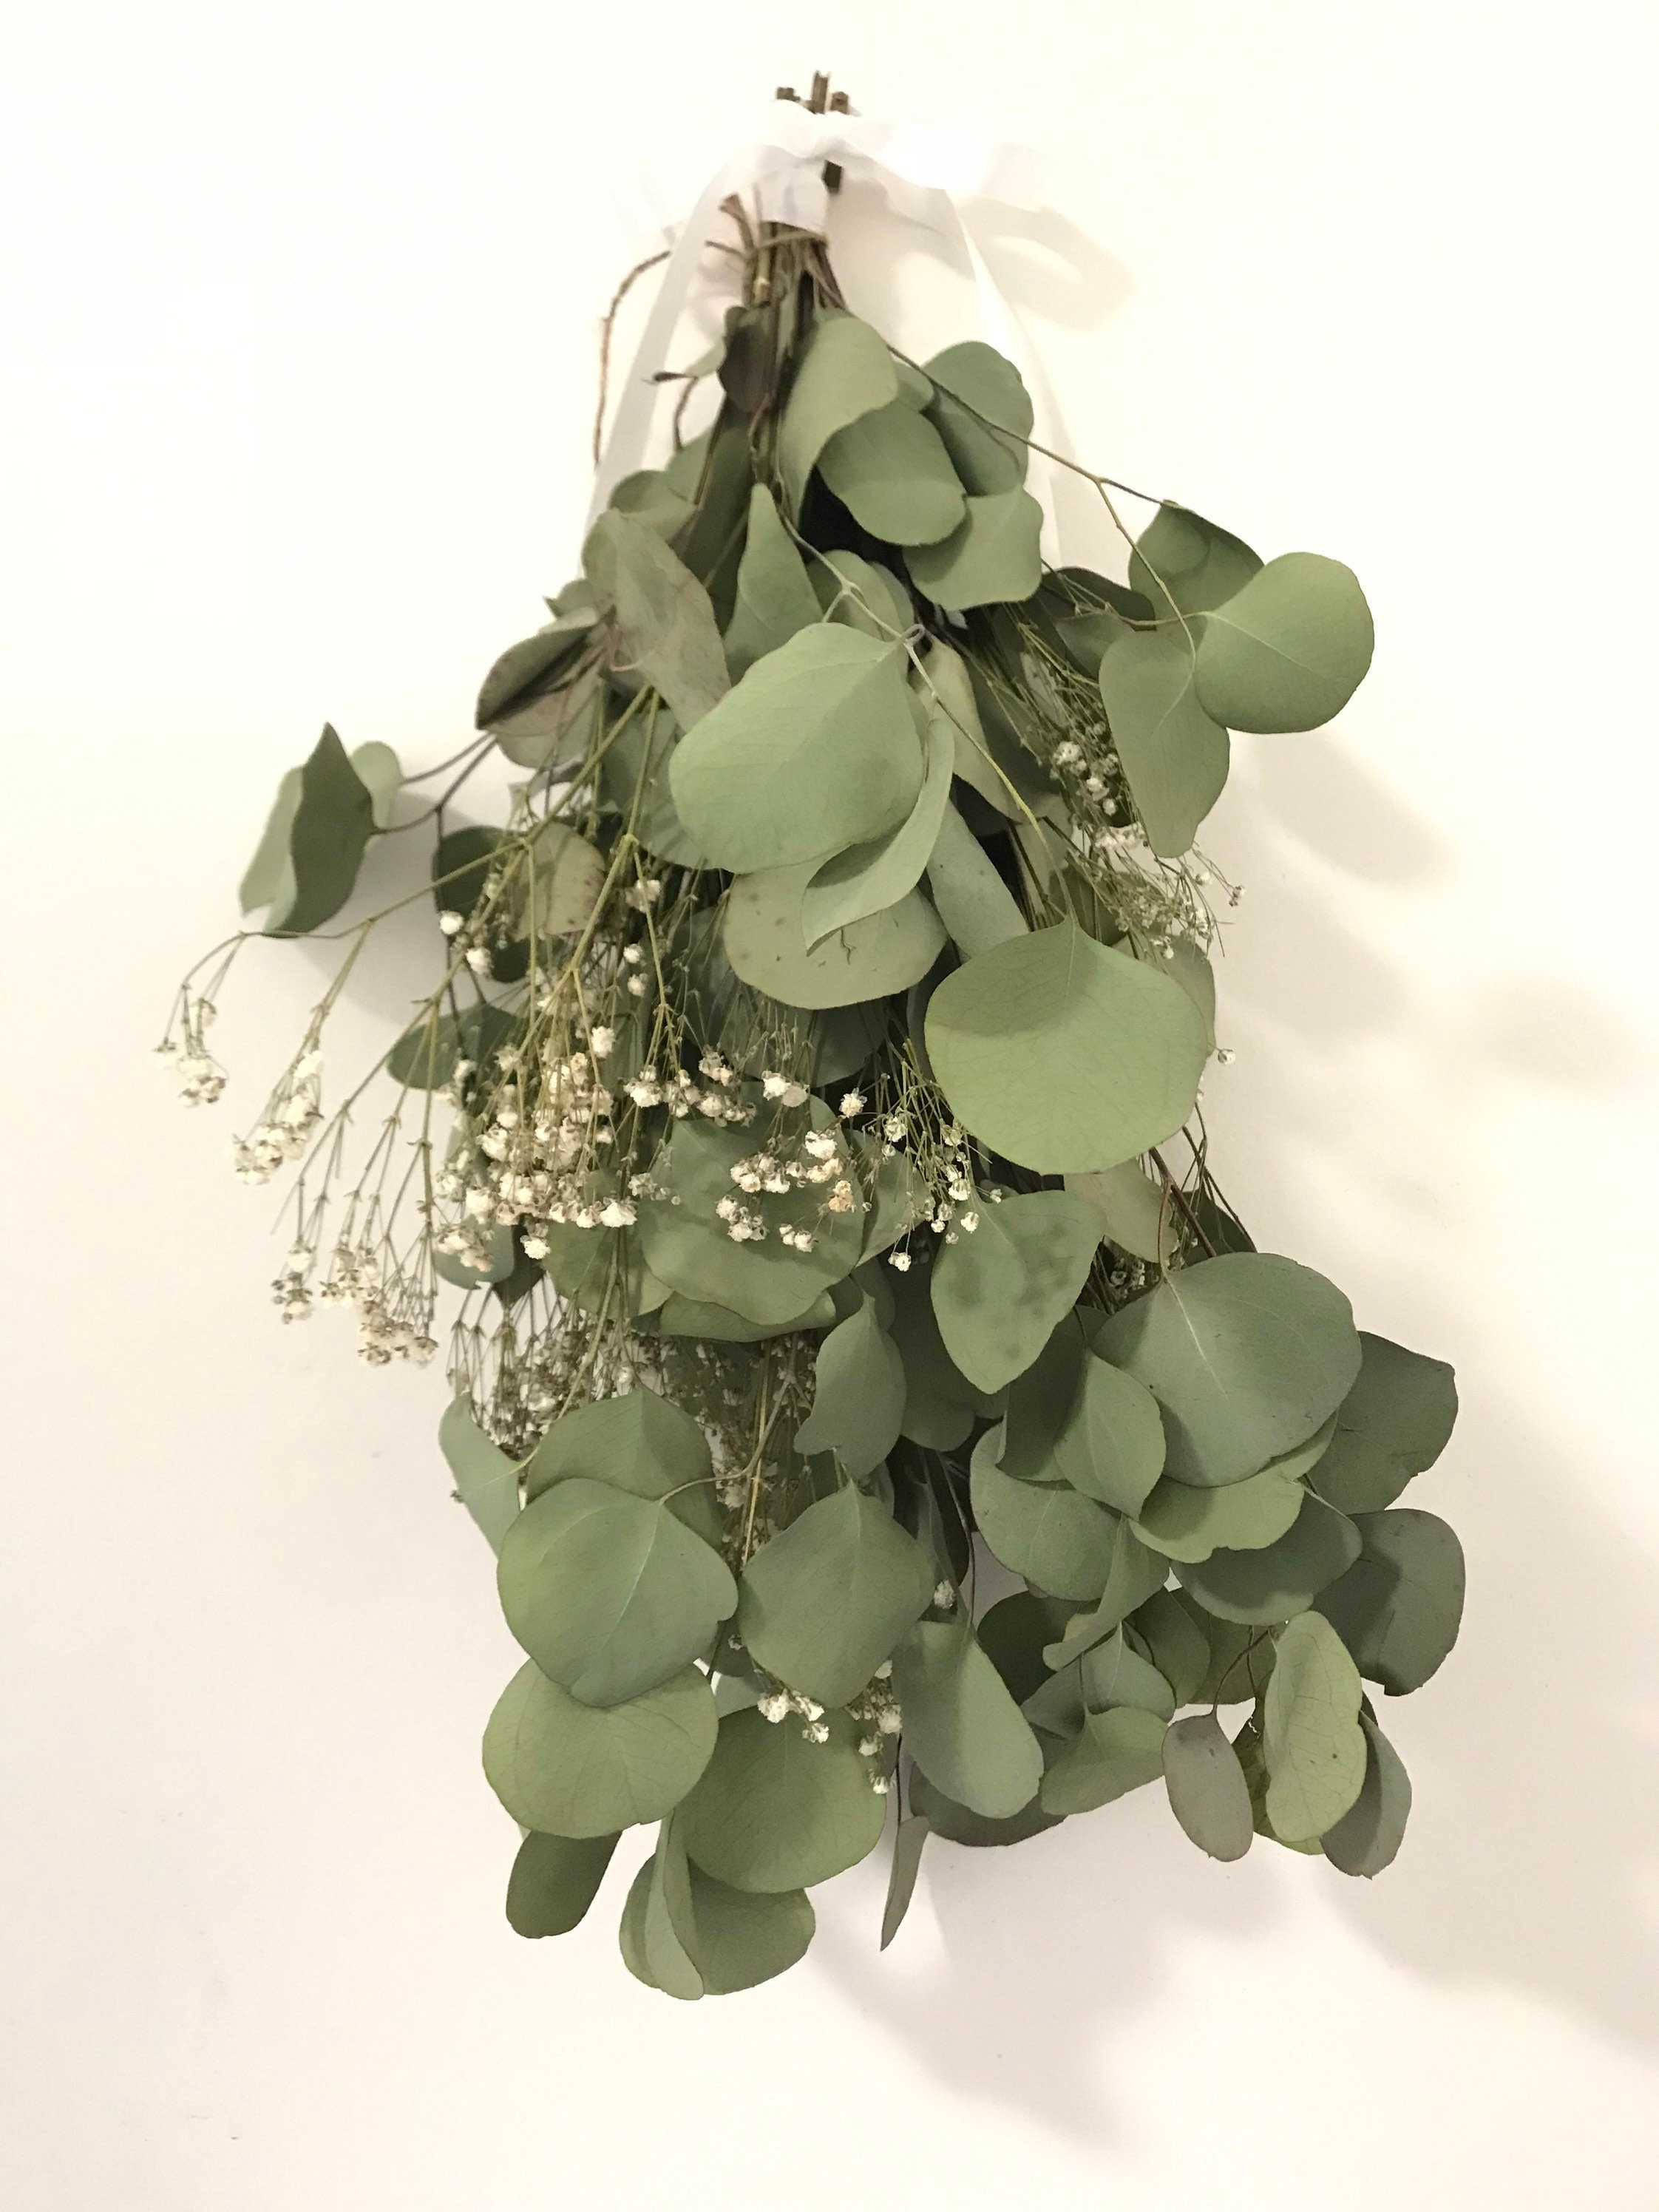  Spirit Up Art 12'' Artificial Baby Breath Flower Bouquet, 6 Fake  Gypsophila Flowers and 6 Silver Dollar Eucalyptus Bouquets for Bridal  Bridesmaid DIY Wedding Party Home Decoration Gifts : Home & Kitchen